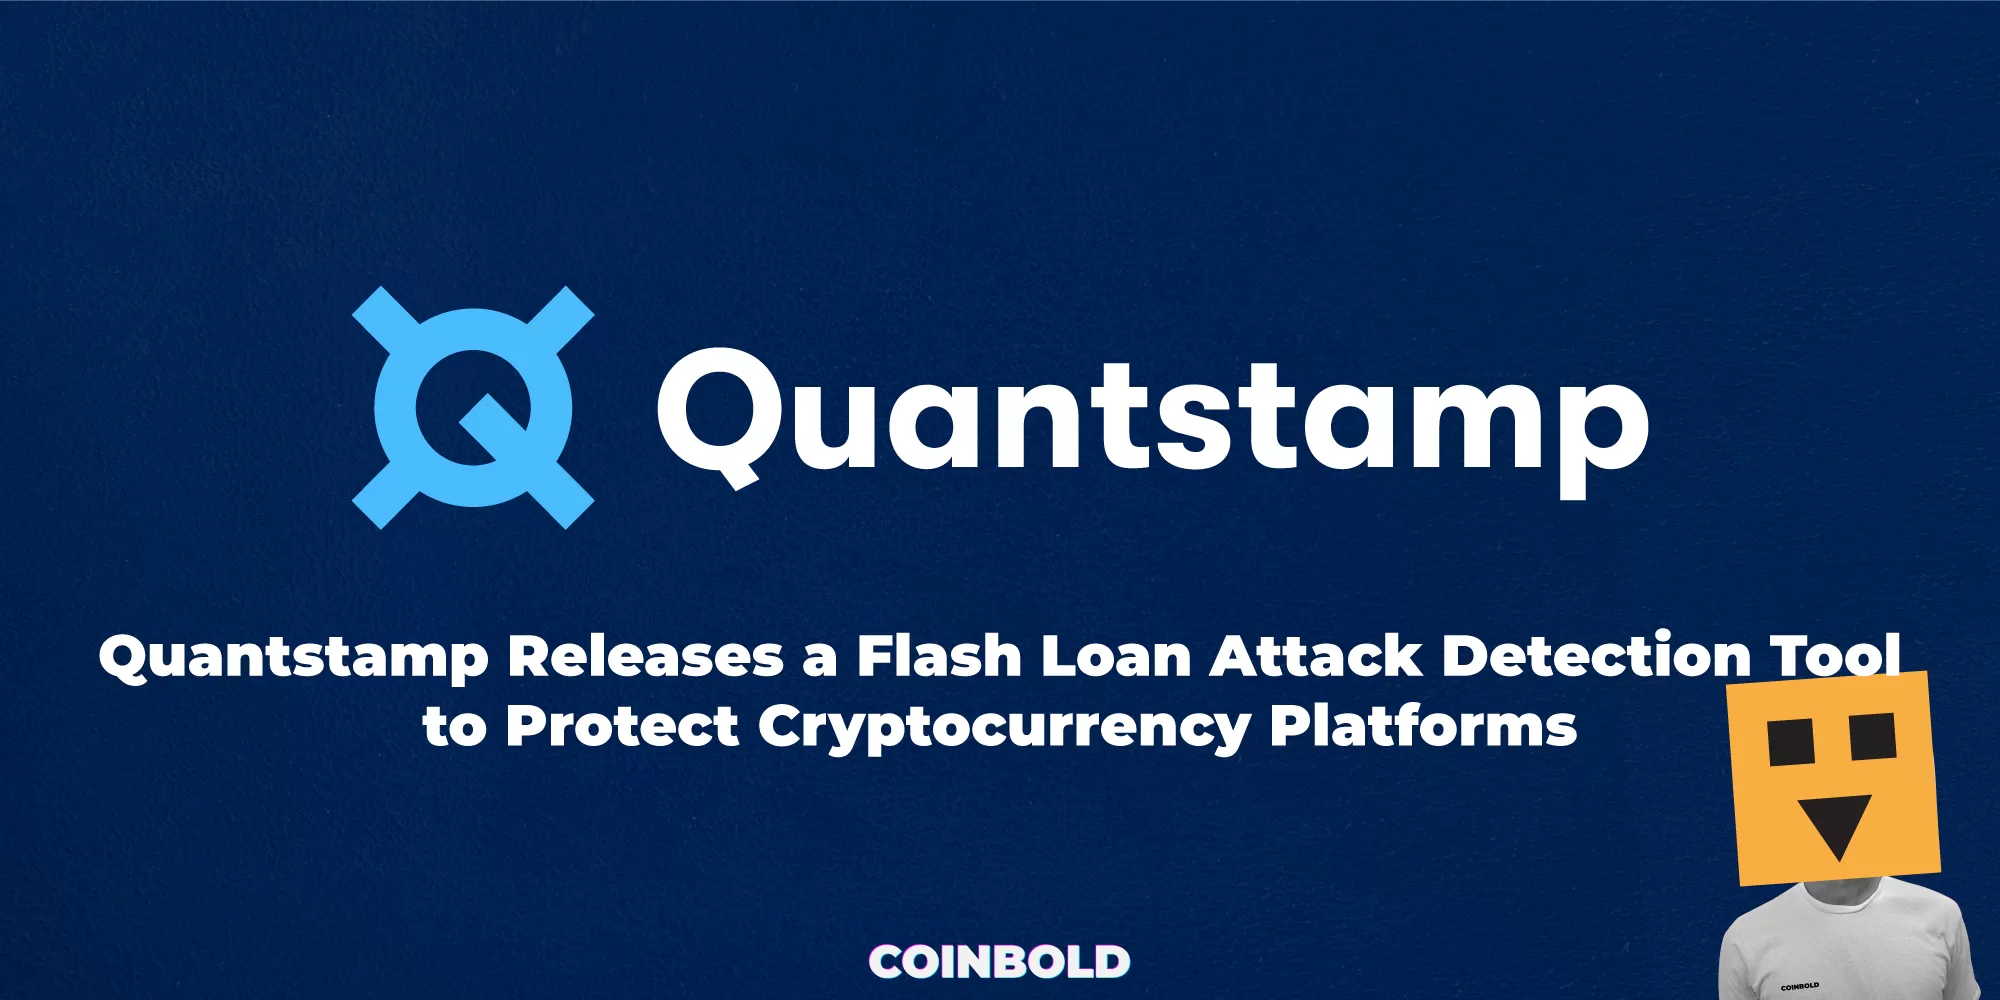 Quantstamp Releases a Flash Loan Attack Detection Tool to Protect Cryptocurrency Platforms